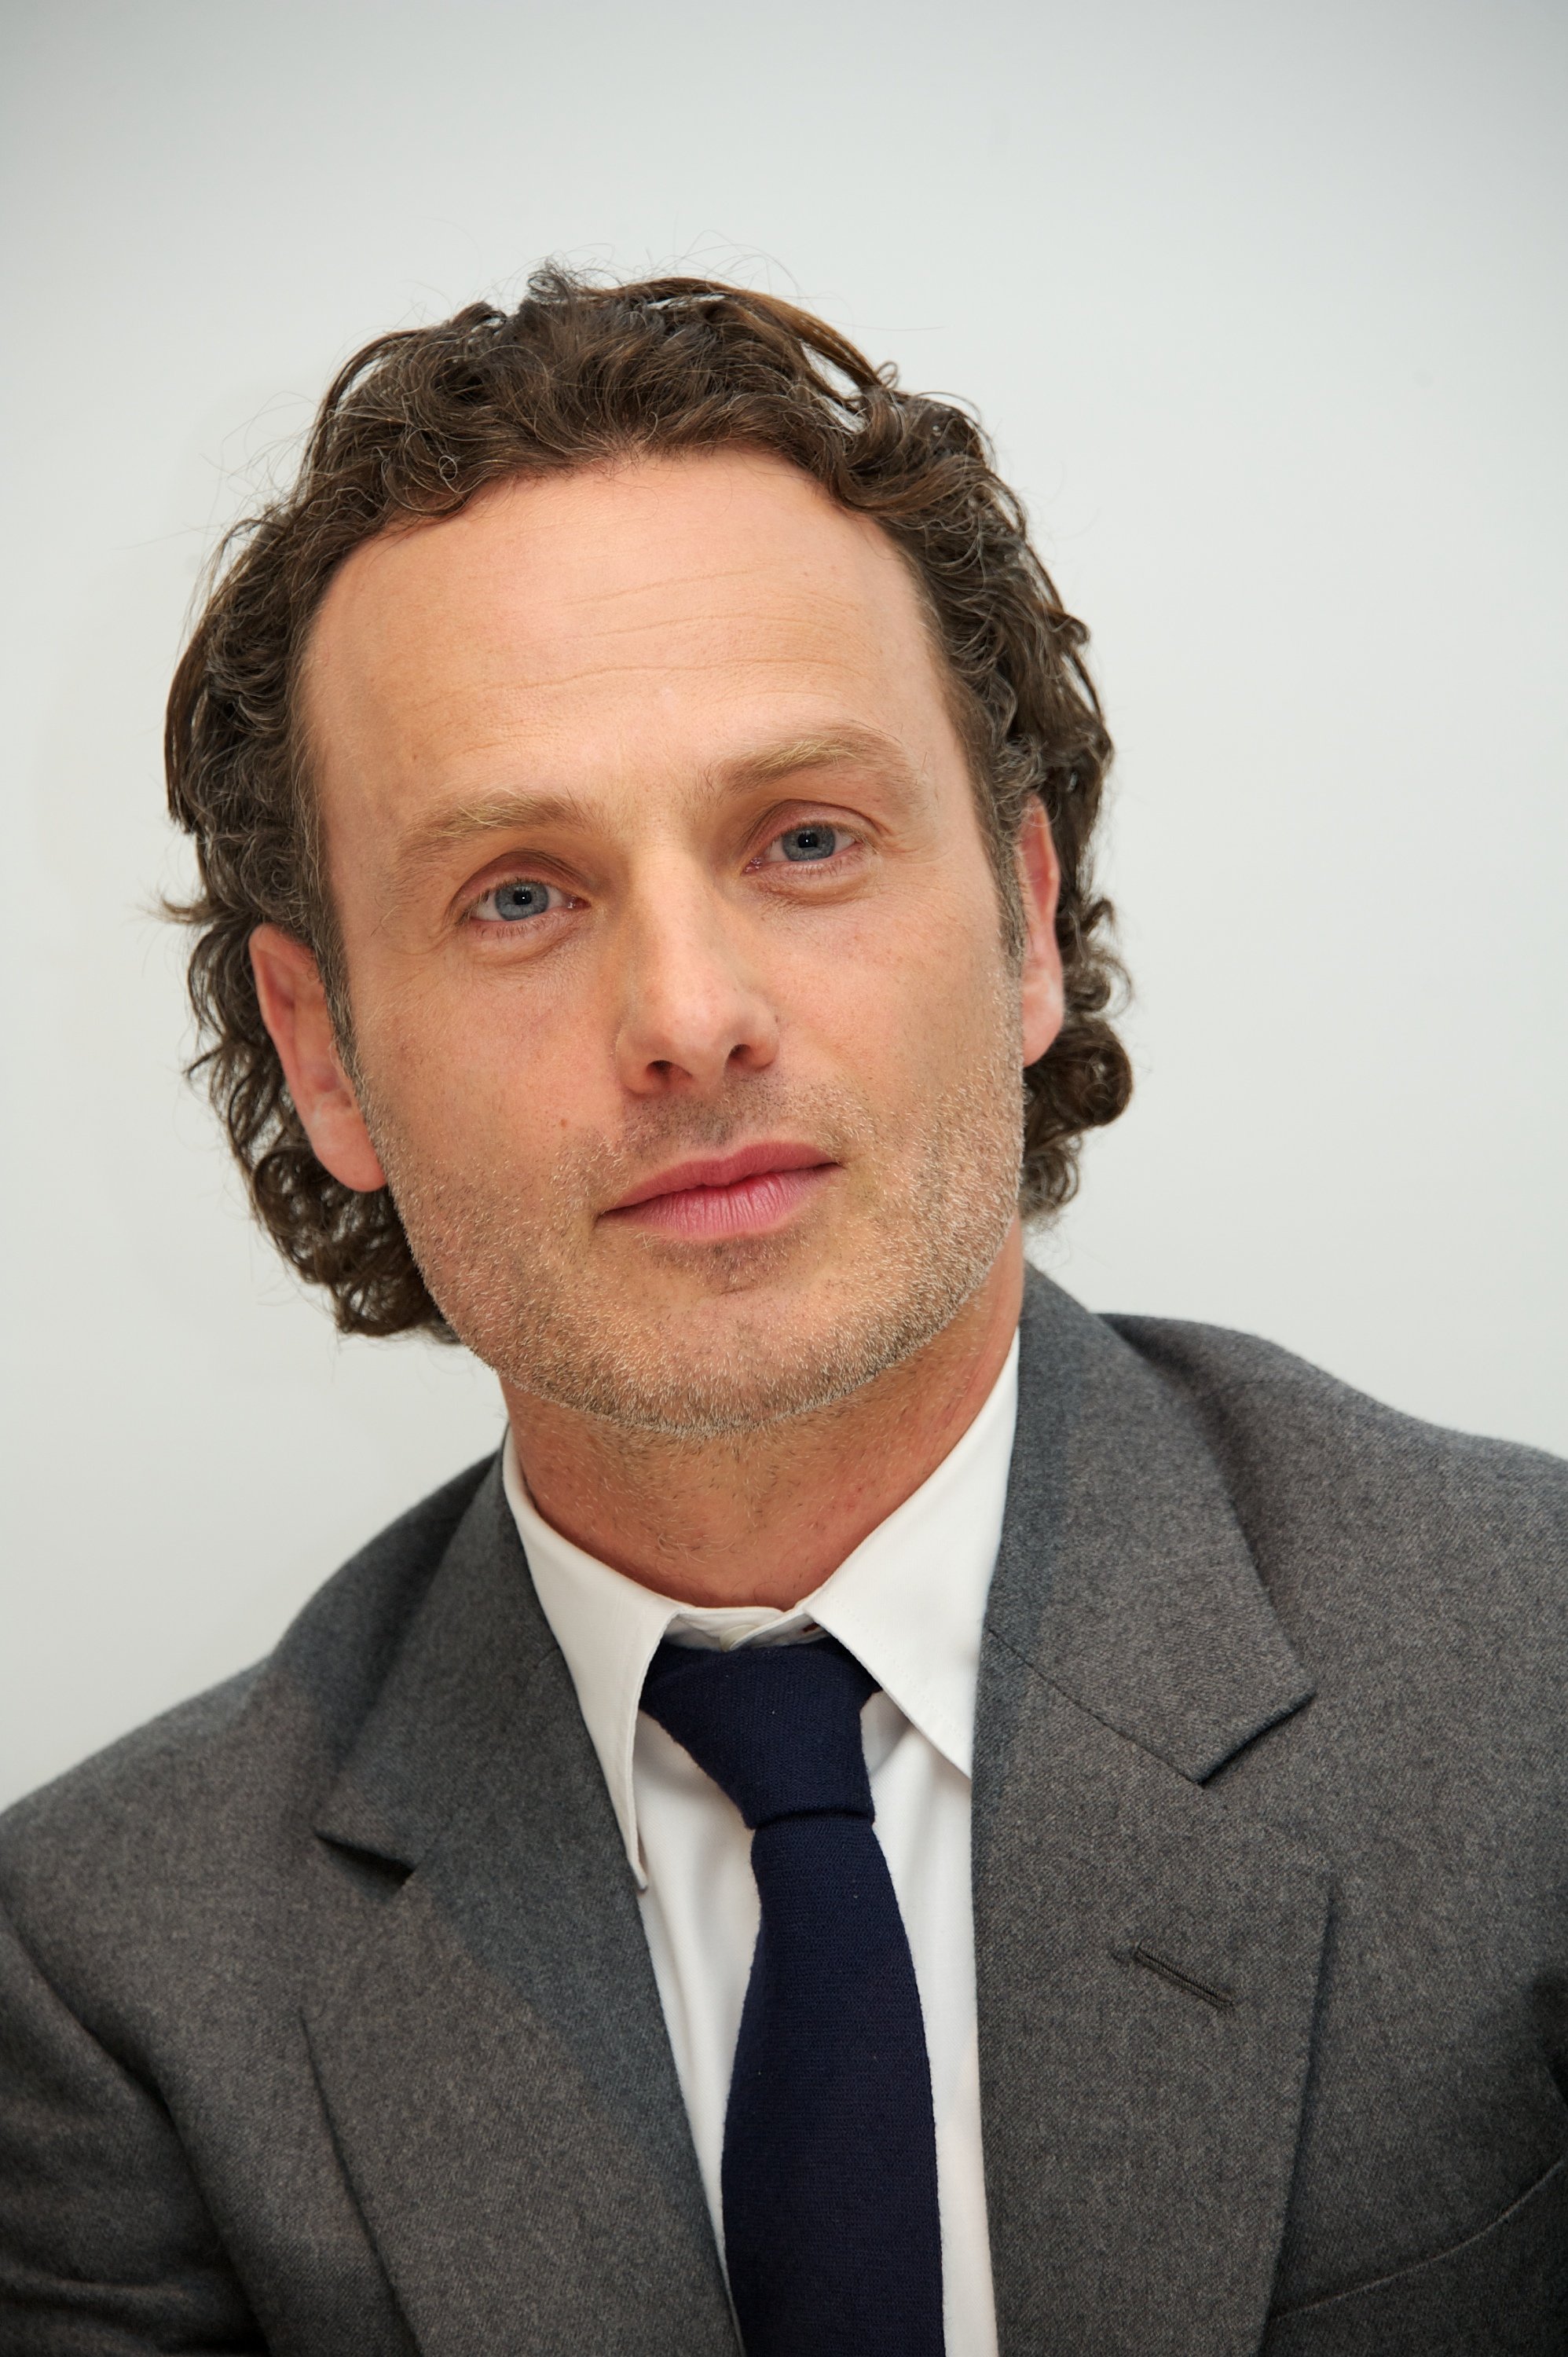 Andrew Lincoln at "The Walking Dead" press conference on April 20, 2015 | Source: Getty Images